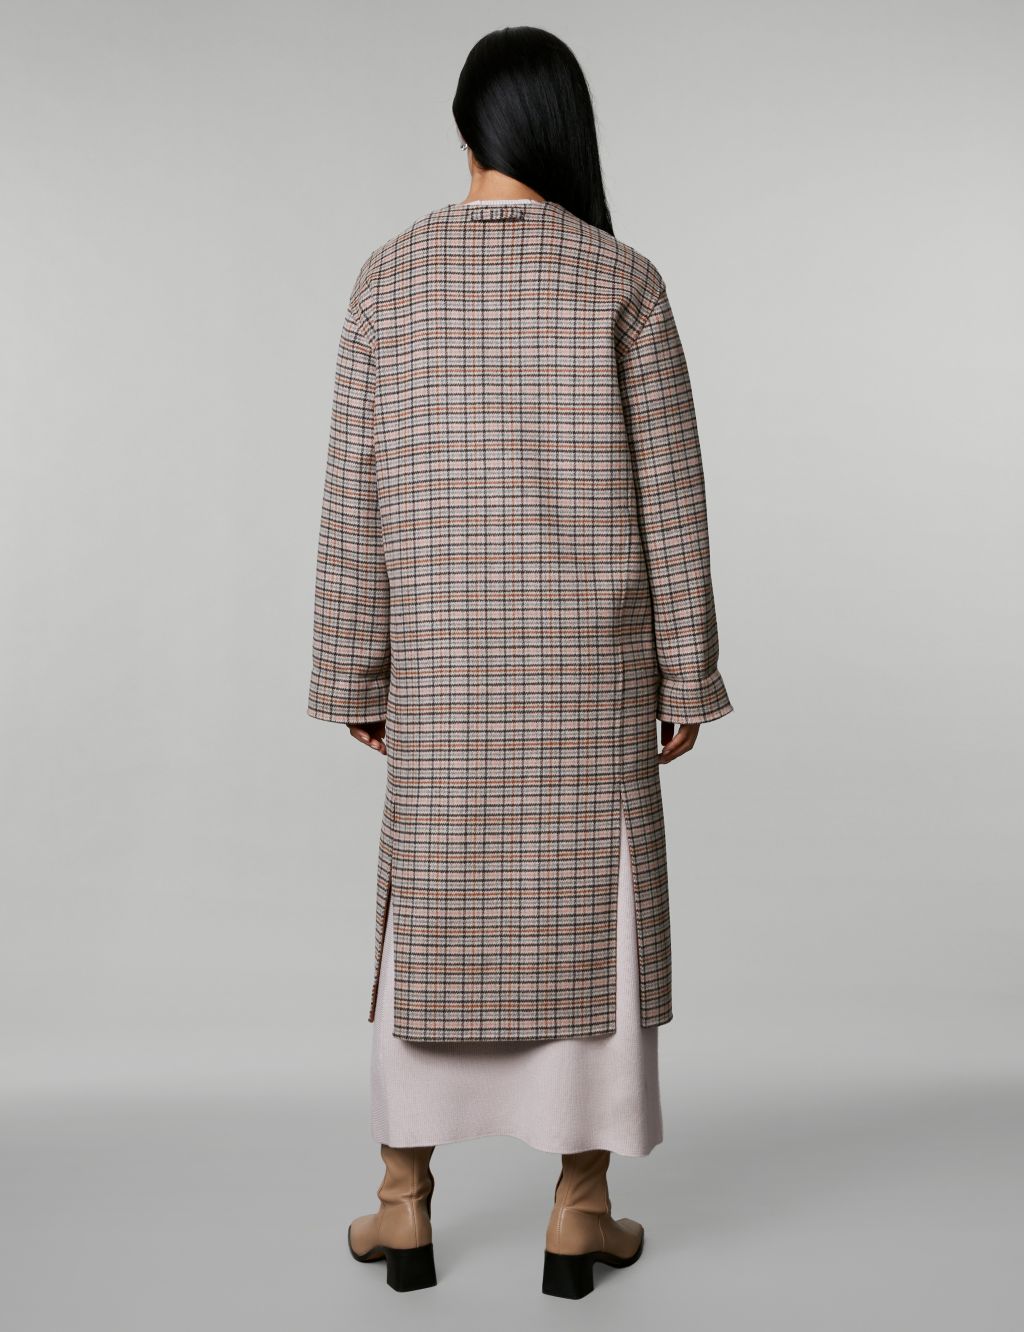 Wool Rich Checked Reversible Coat image 6